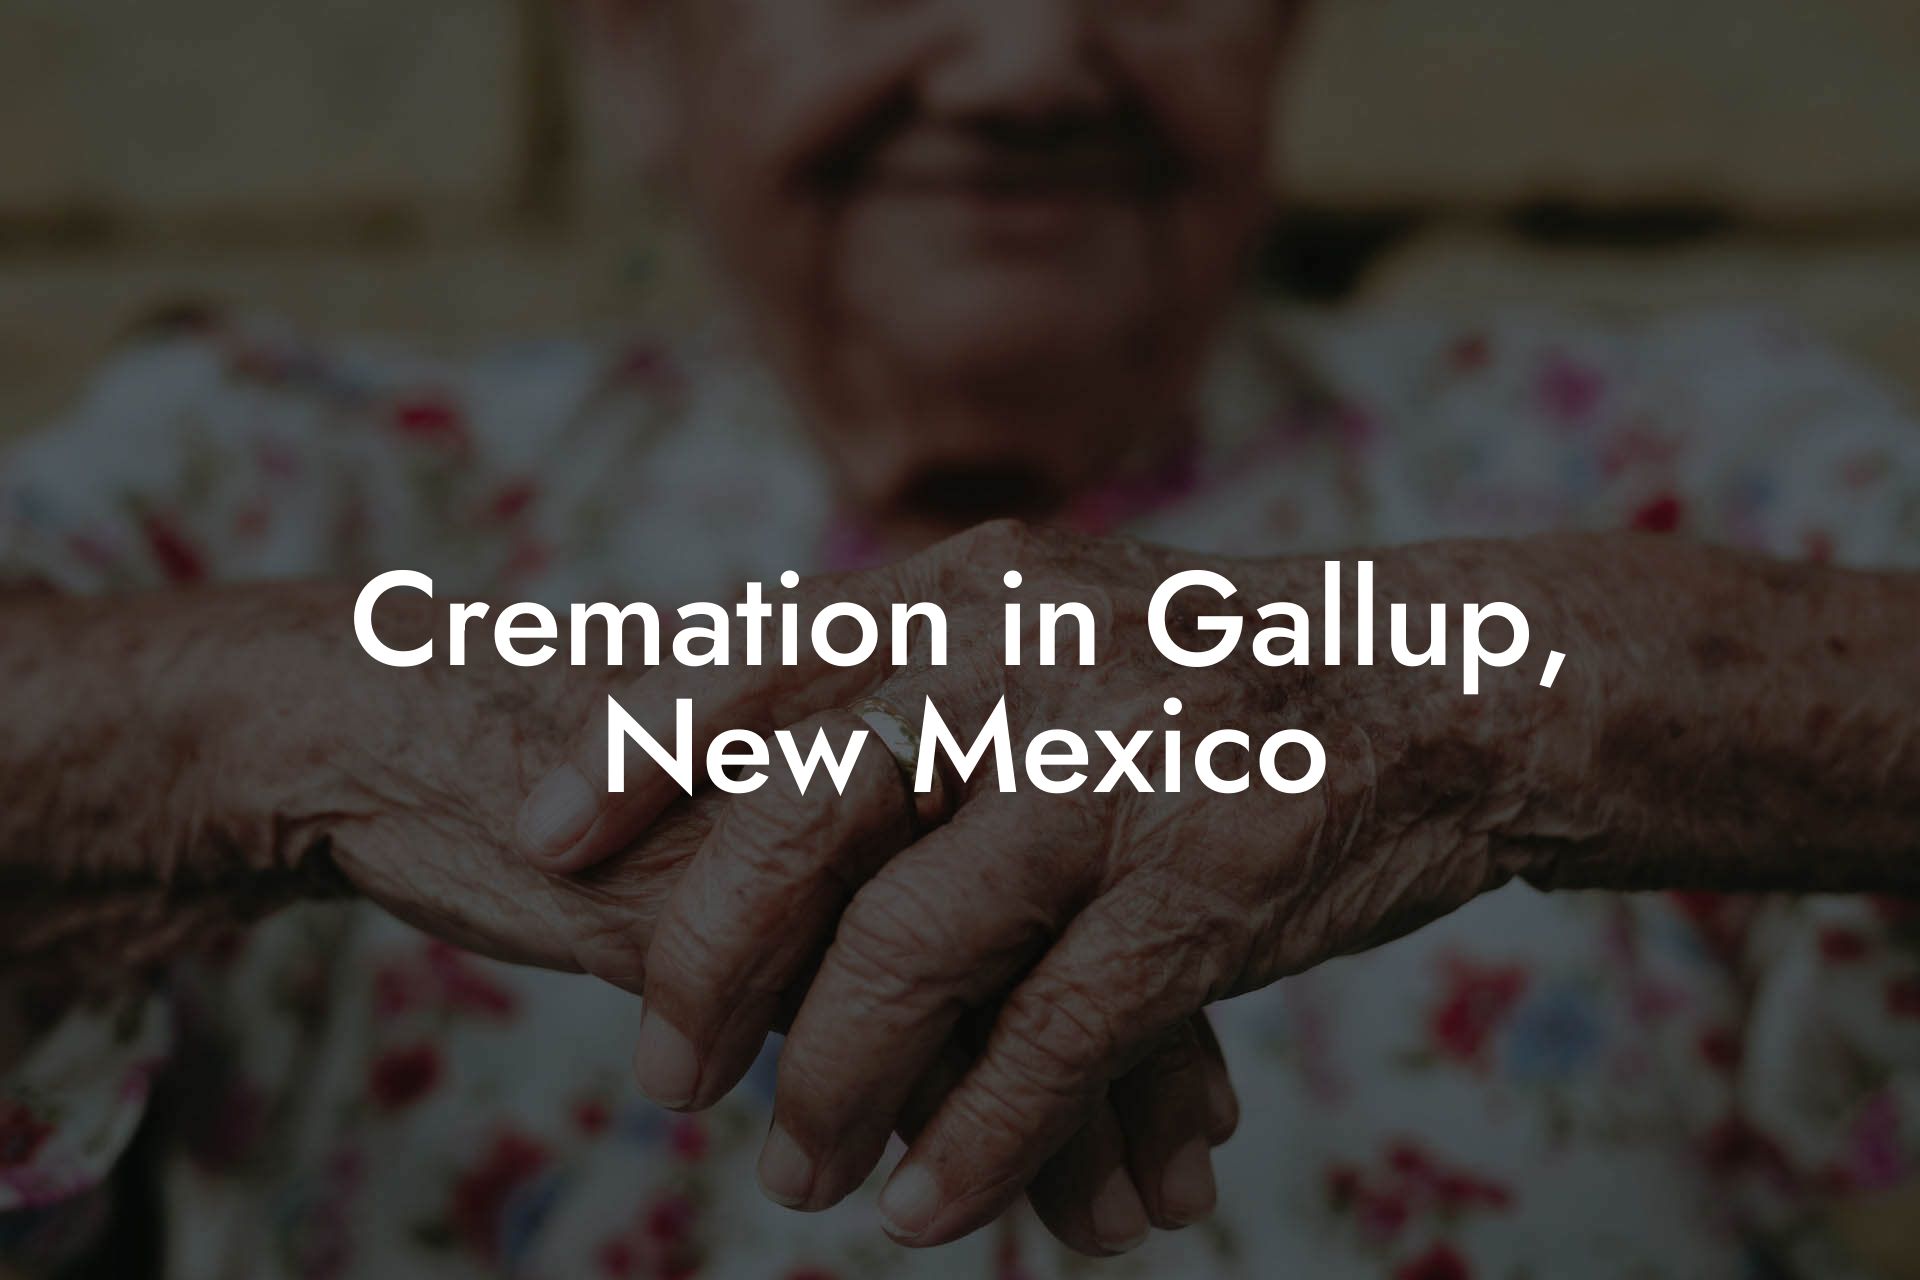 Cremation in Gallup, New Mexico